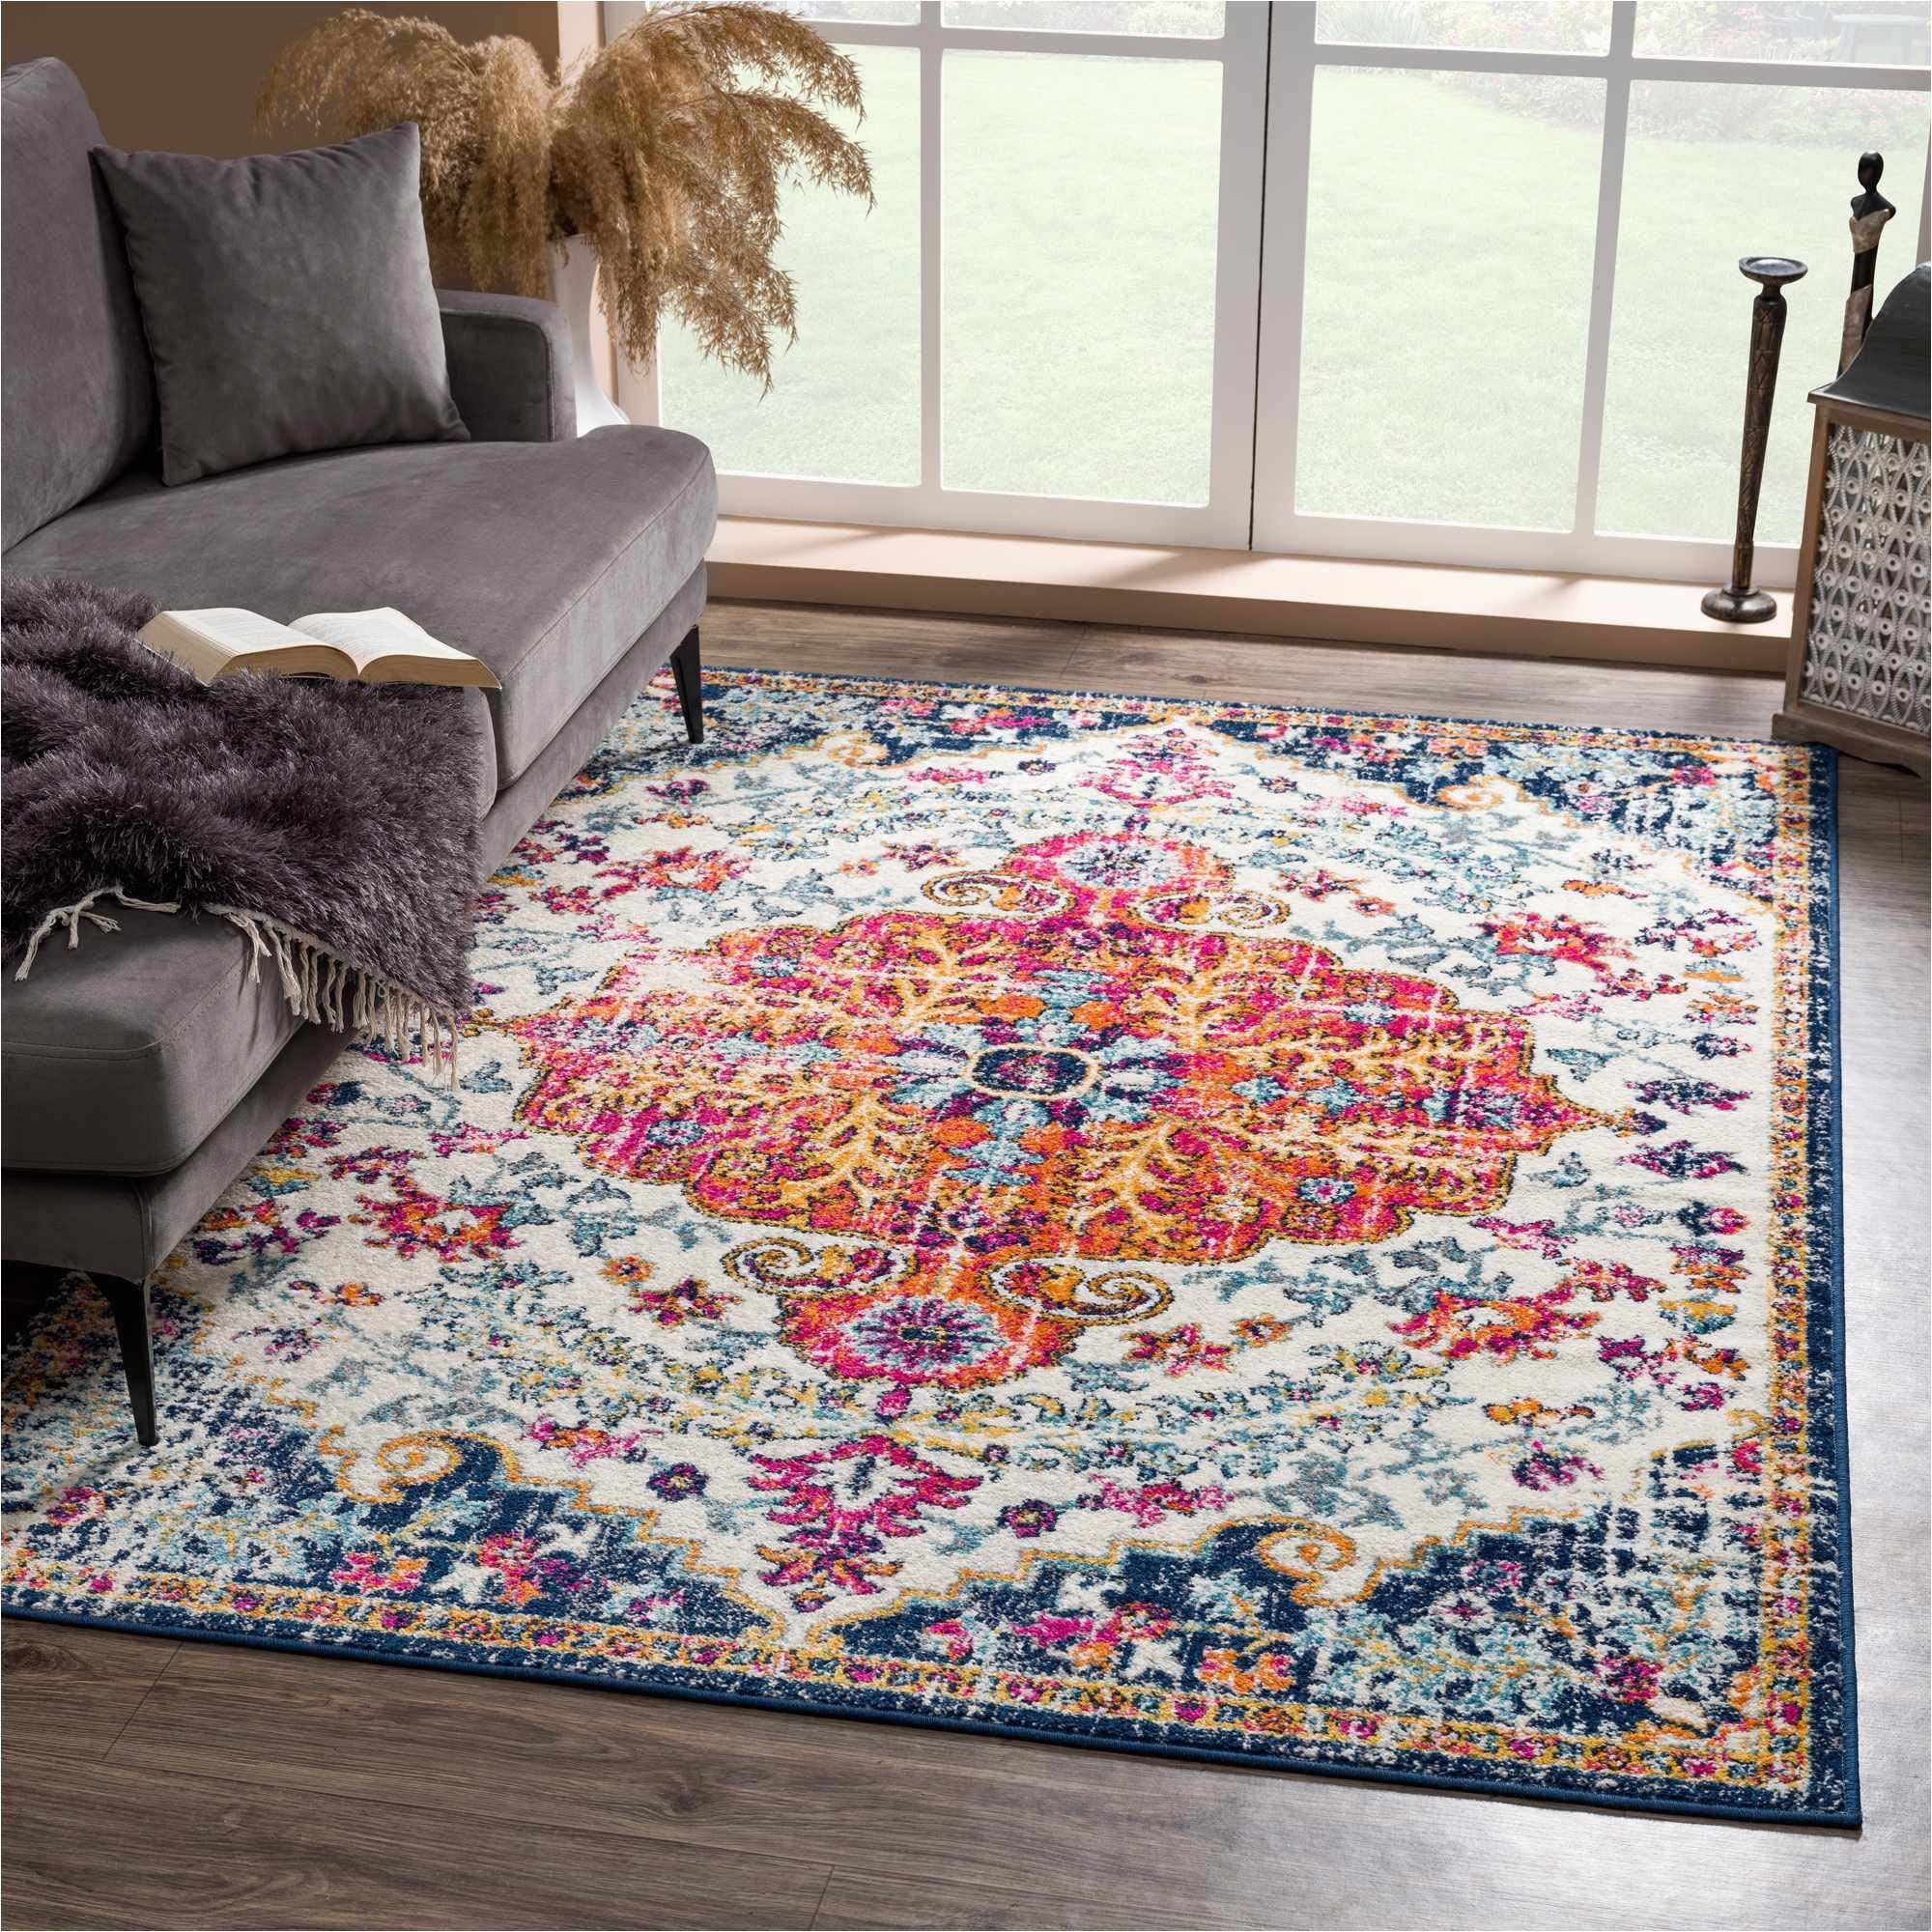 Inexpensive oriental Style area Rugs New Bodrum oriental, Persian, Traditional Living Room, Bedroom area Rug – Colorful Floral Medallion Carpet – Vintage Distressed – orange, Red, Purple, …